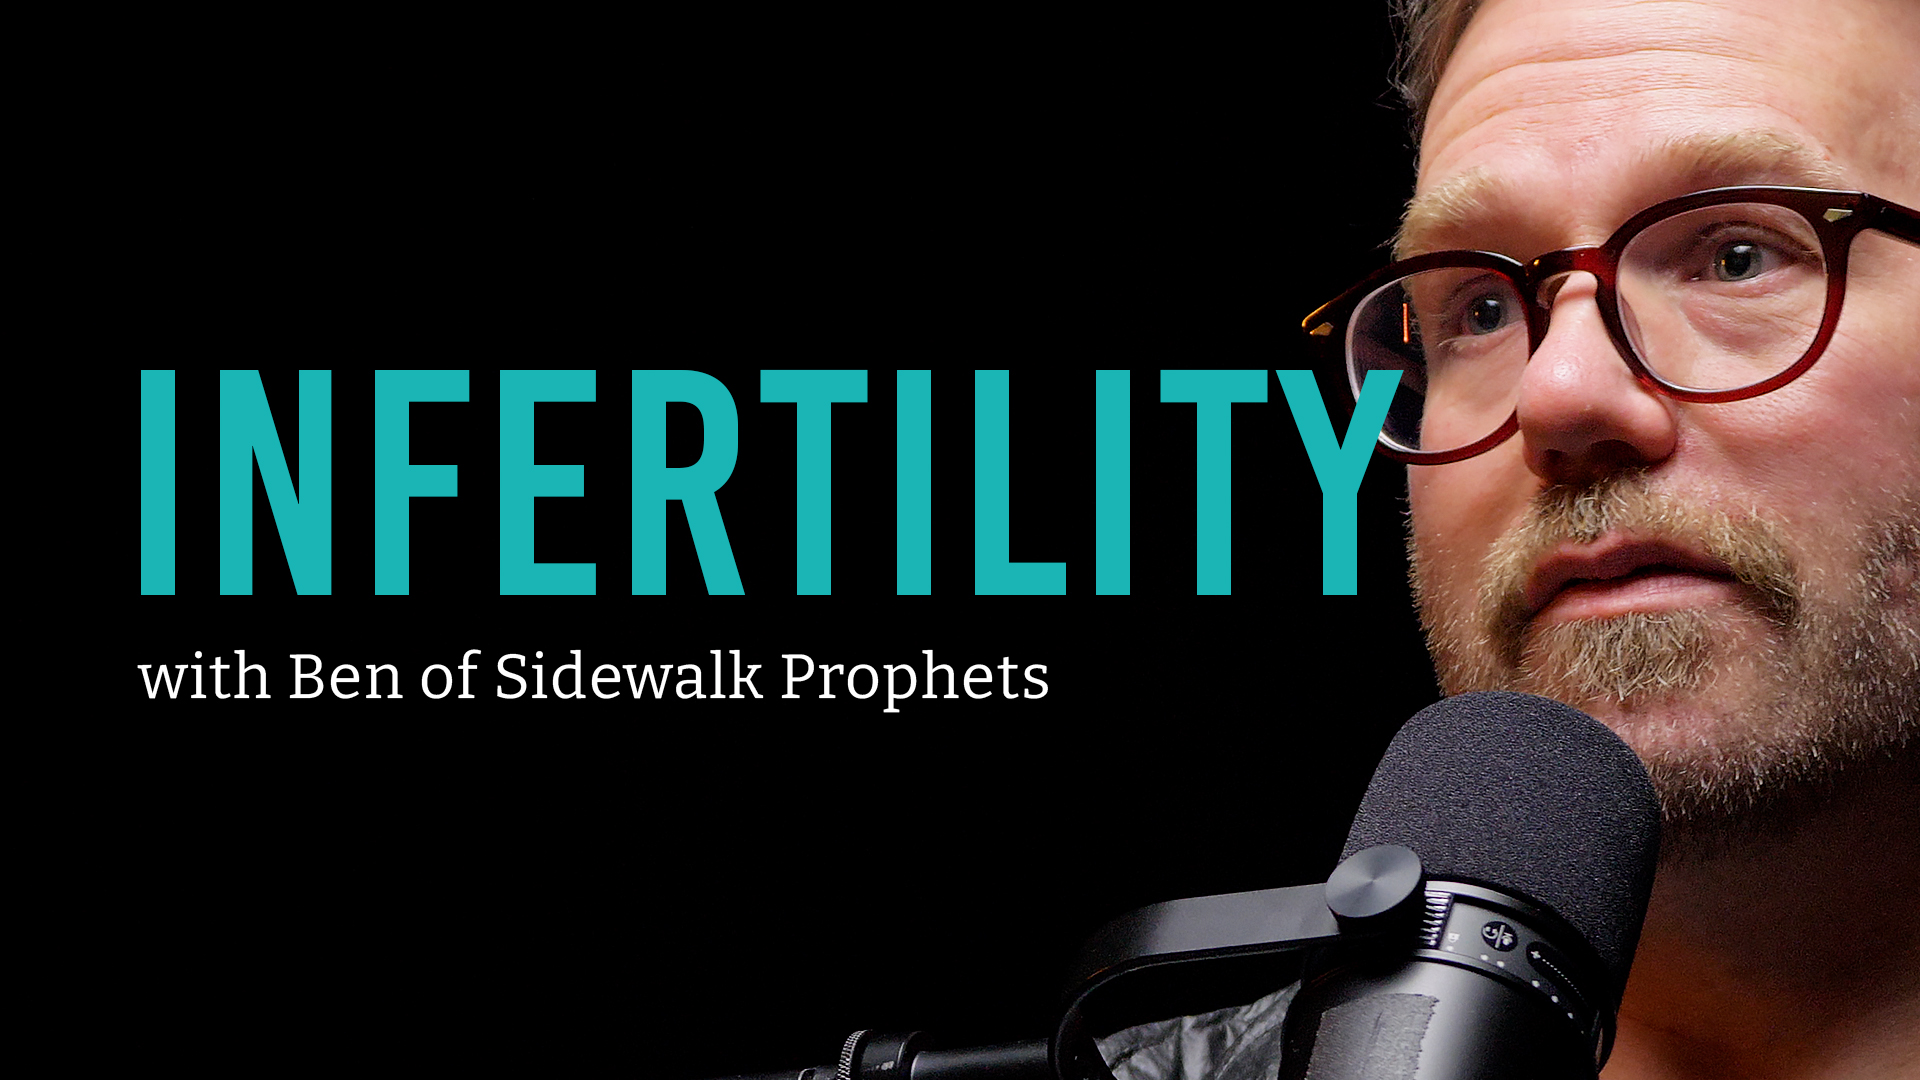 Walking through infertility while trusting in God | Ben from Sidewalk Prophets